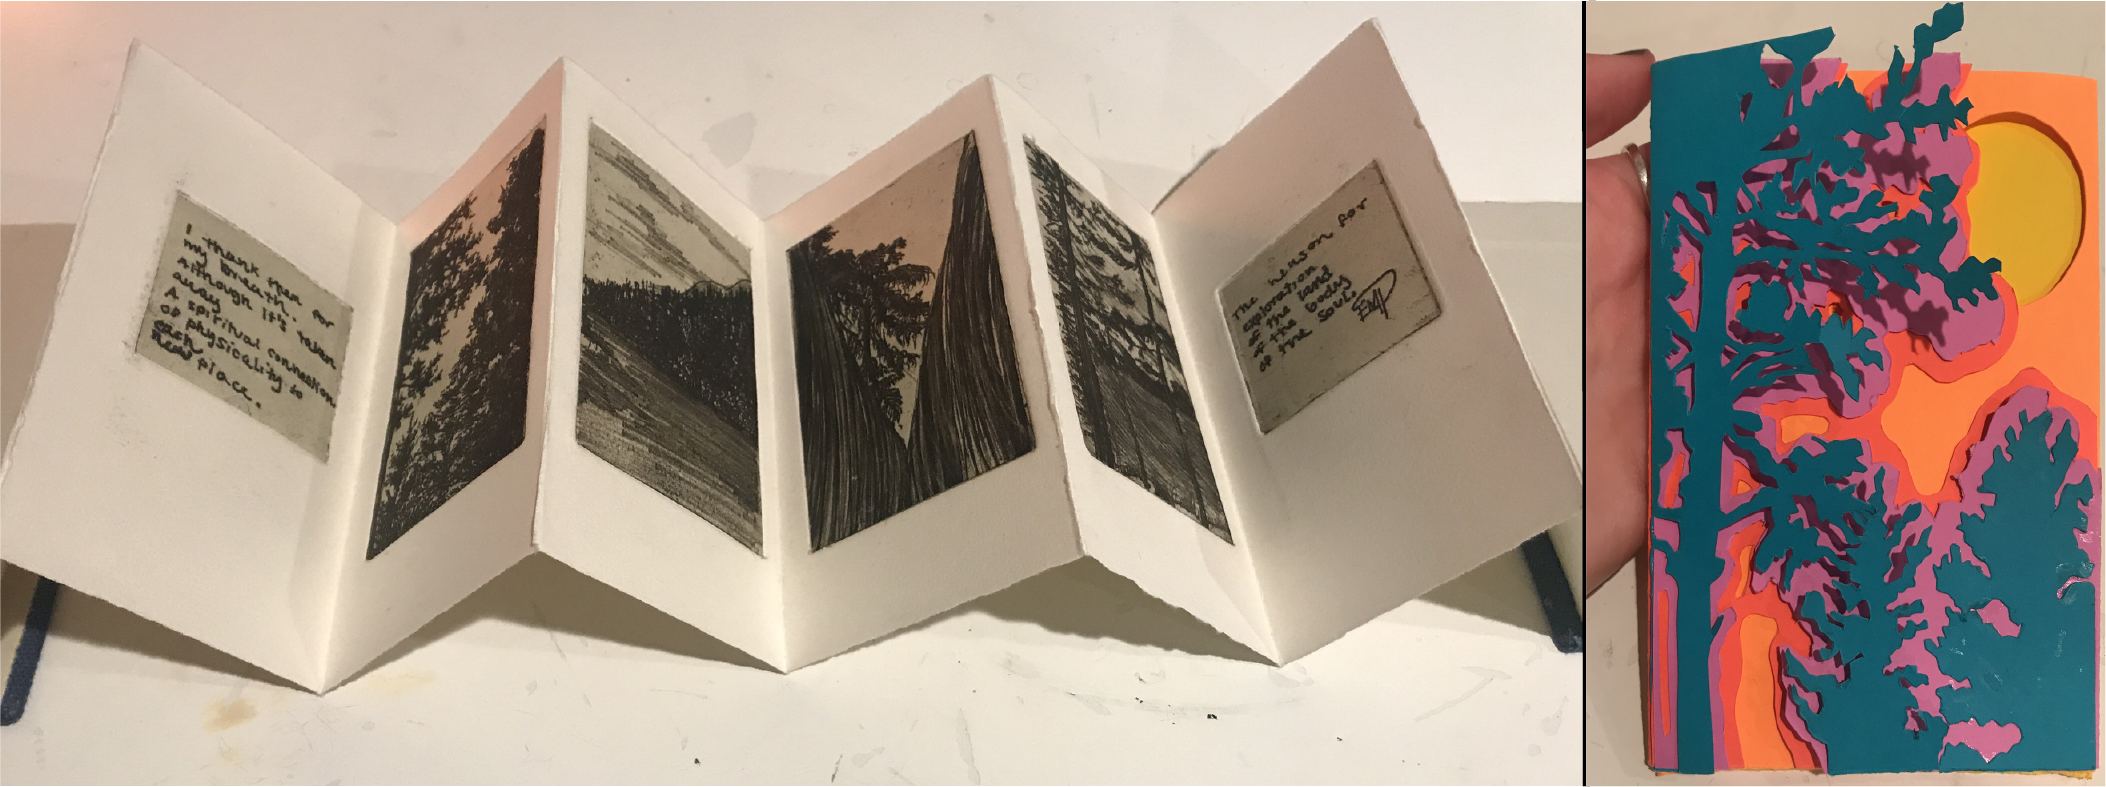 An accordian book with letterpress of trees and a book with a tree cut out in paper against a bright backdrop